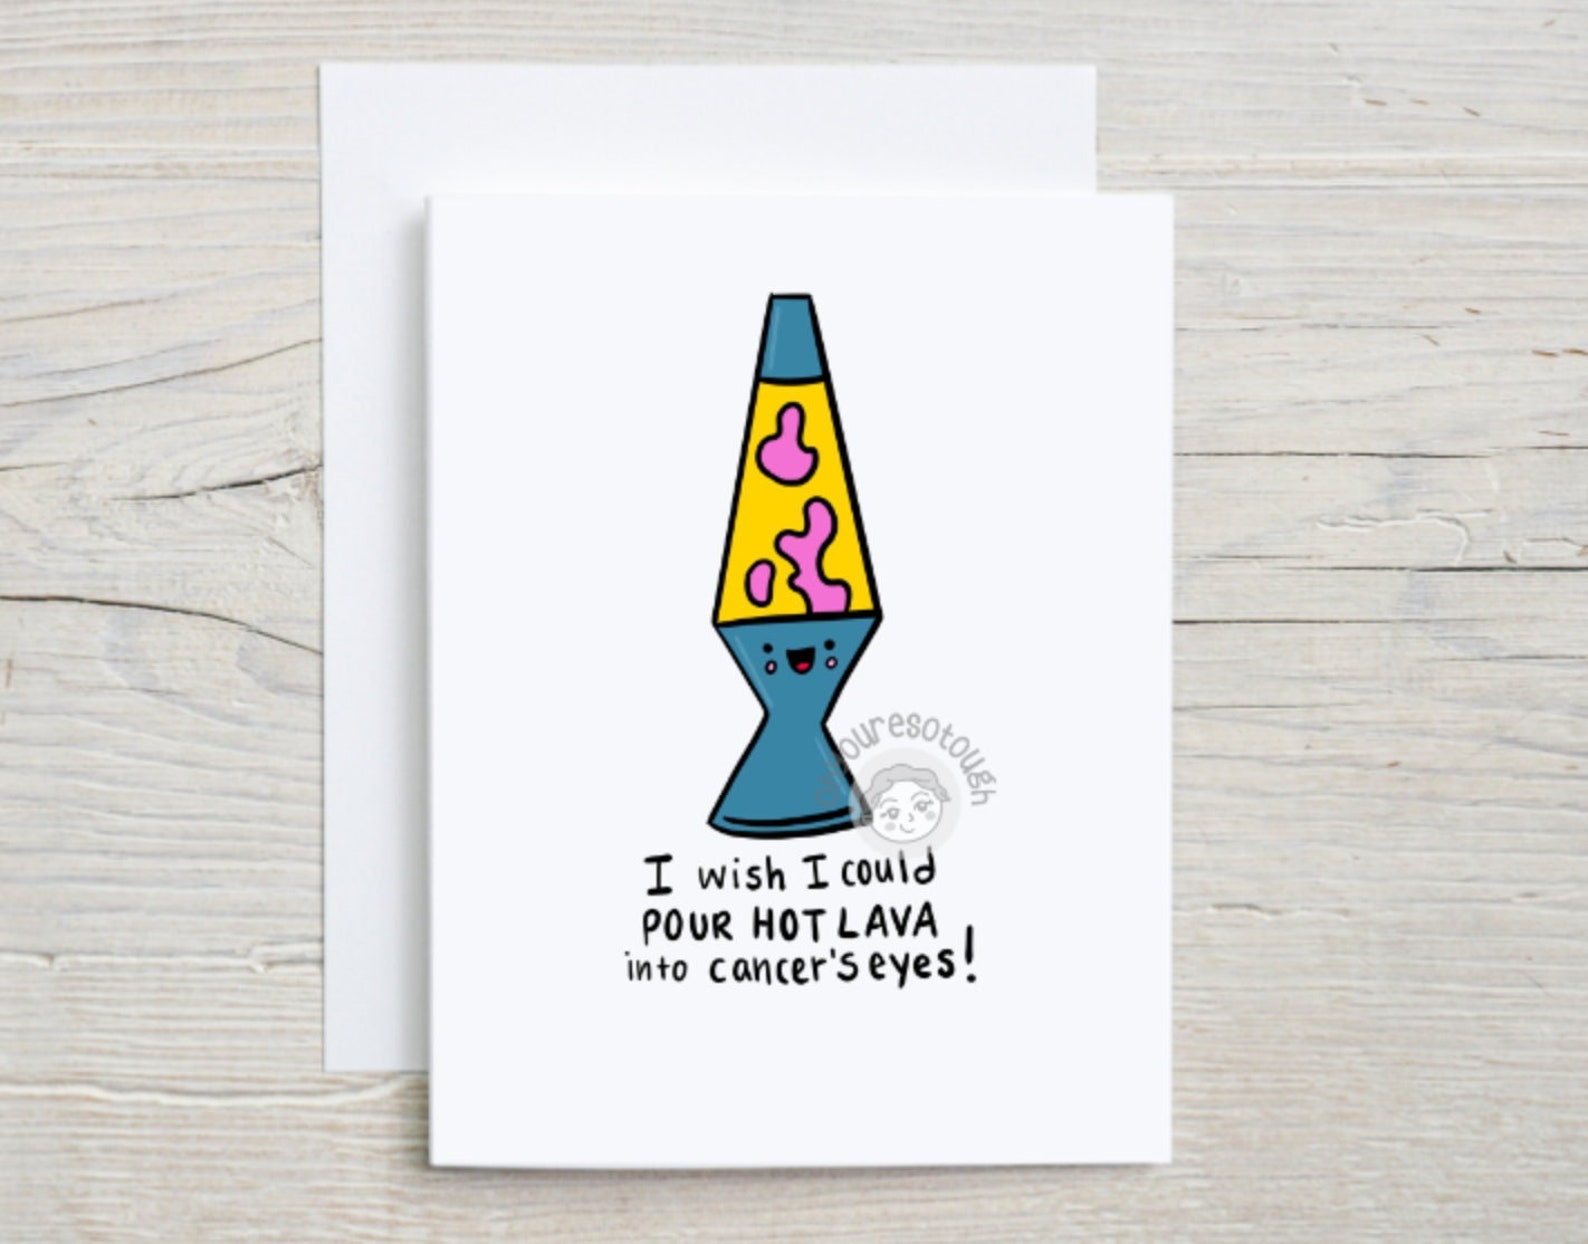 Cancer Greeting Card Funny - Lava Lamp - Cancer Encouragement - Cancer Fighter - Chemo Gift - Cancer Card - Cancer Fighter Gift